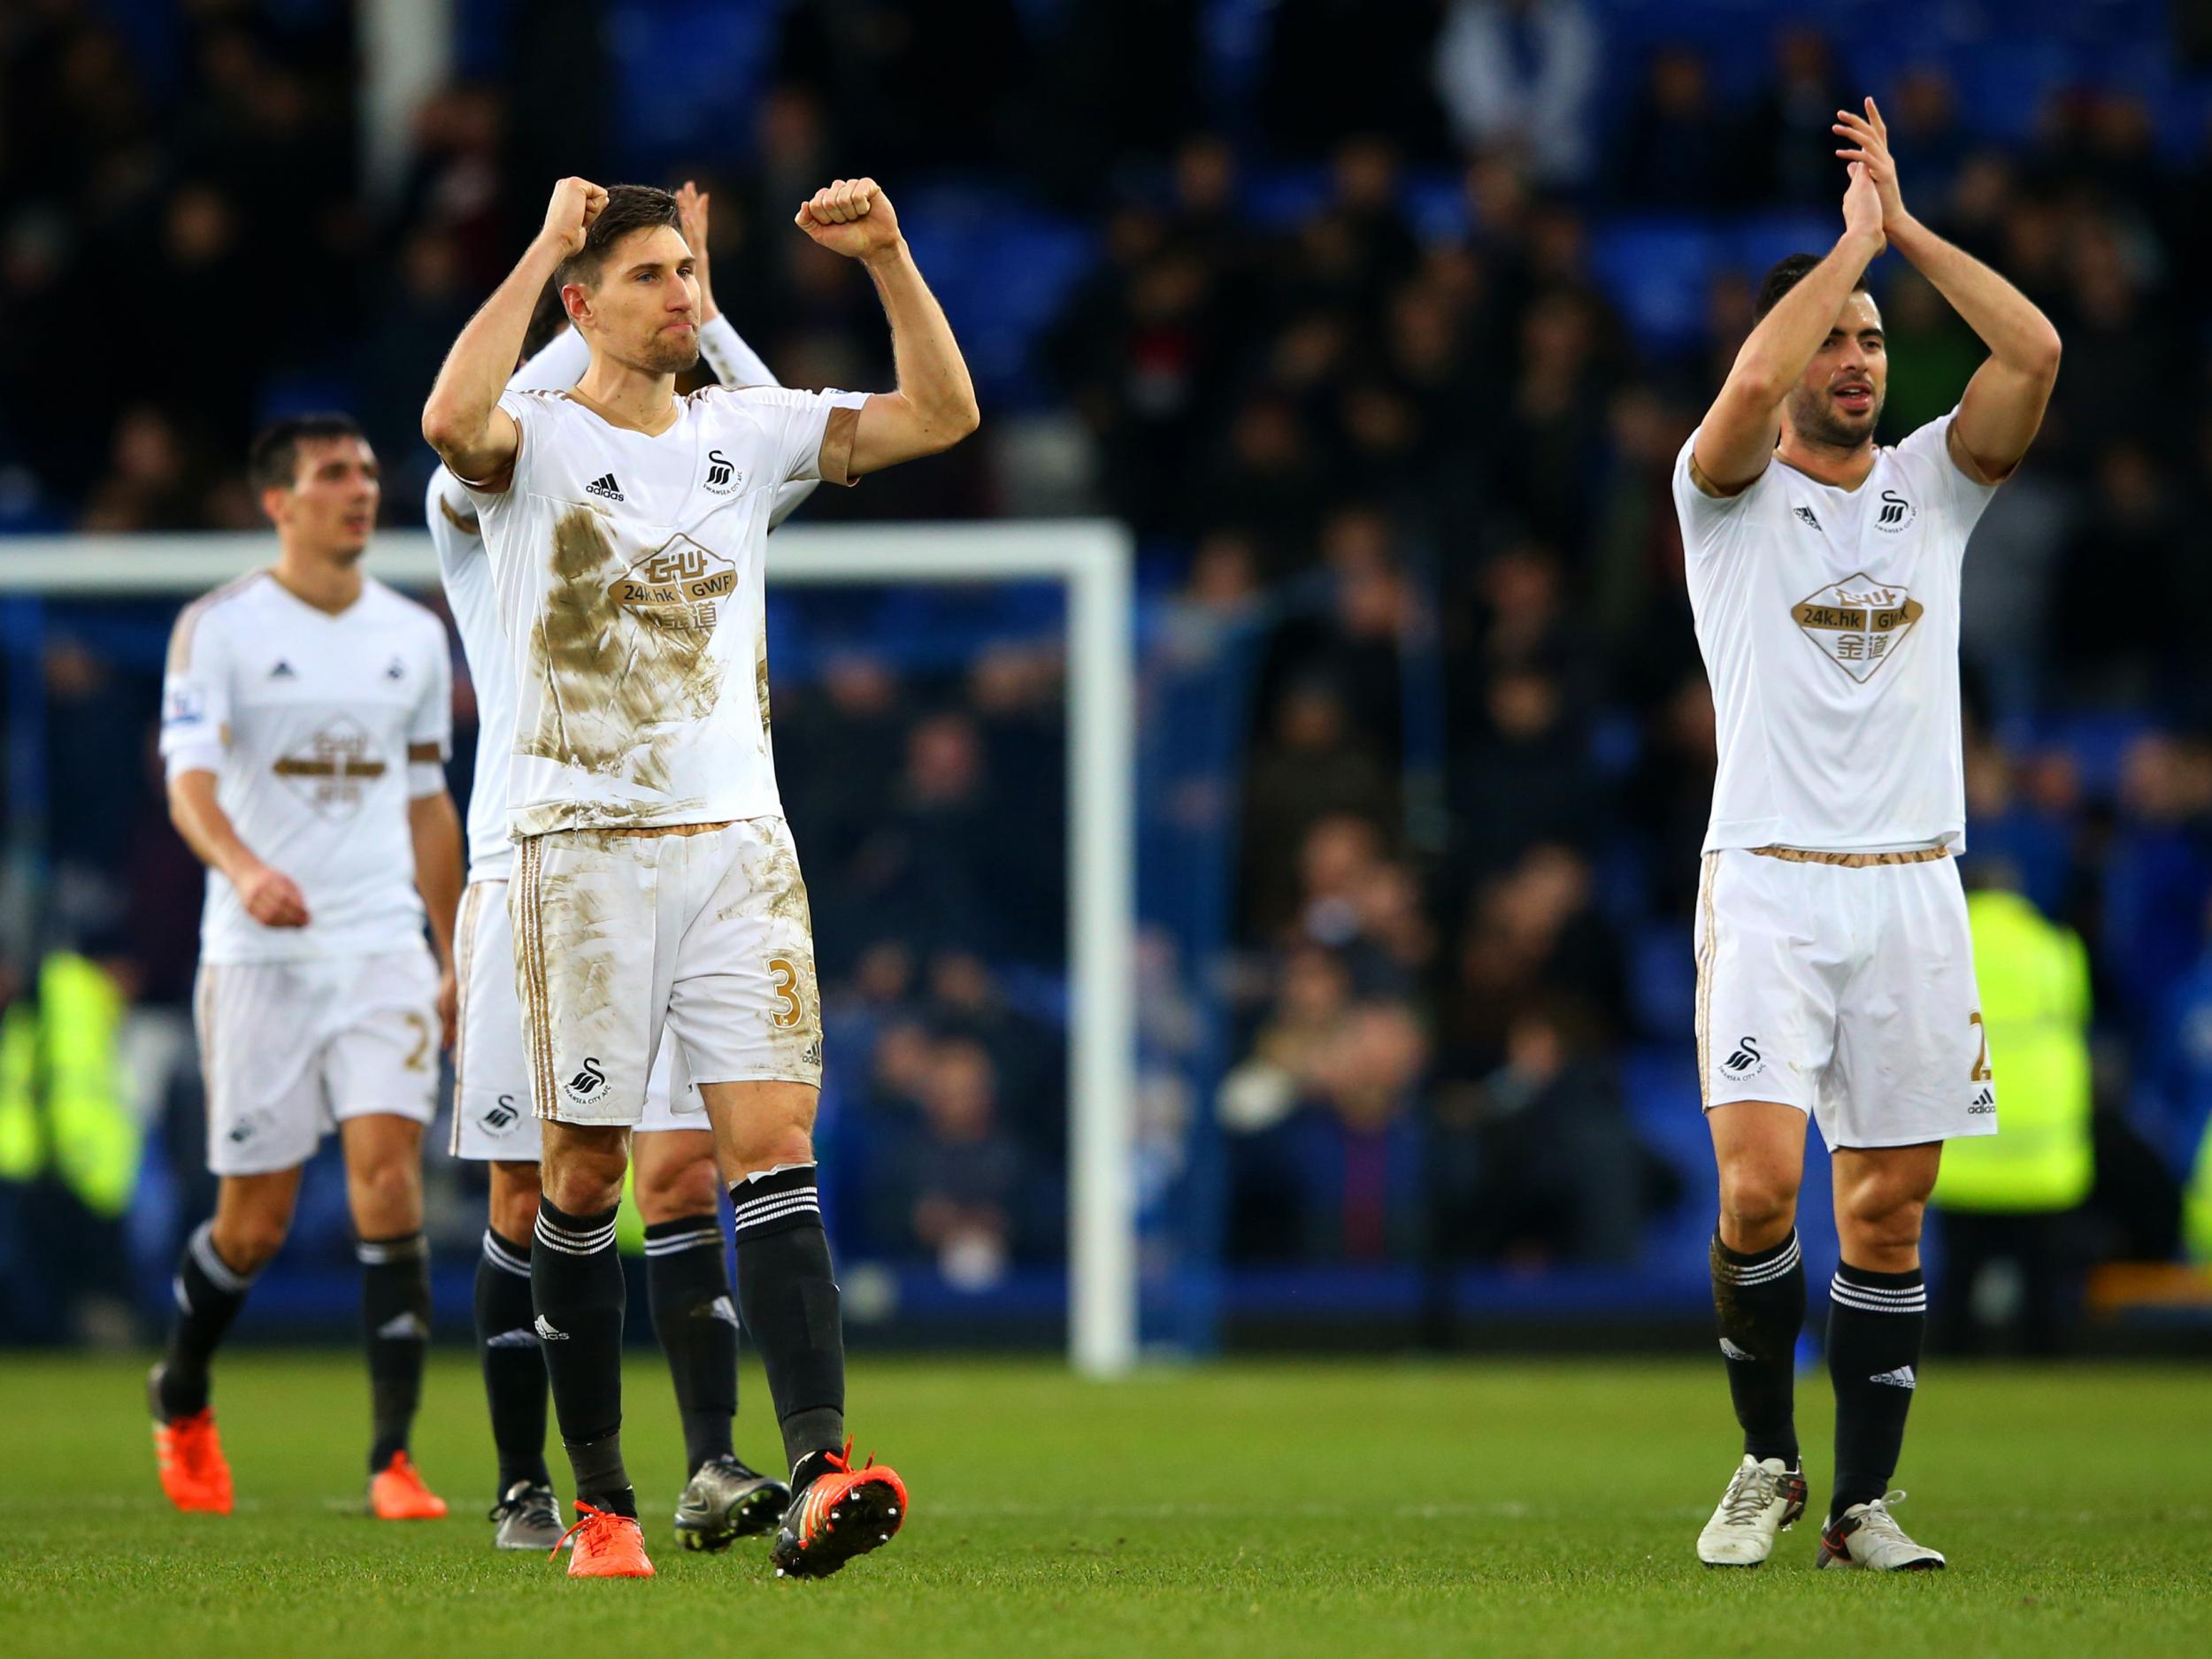 Swansea City players celebrate the 2-1 win at Everton